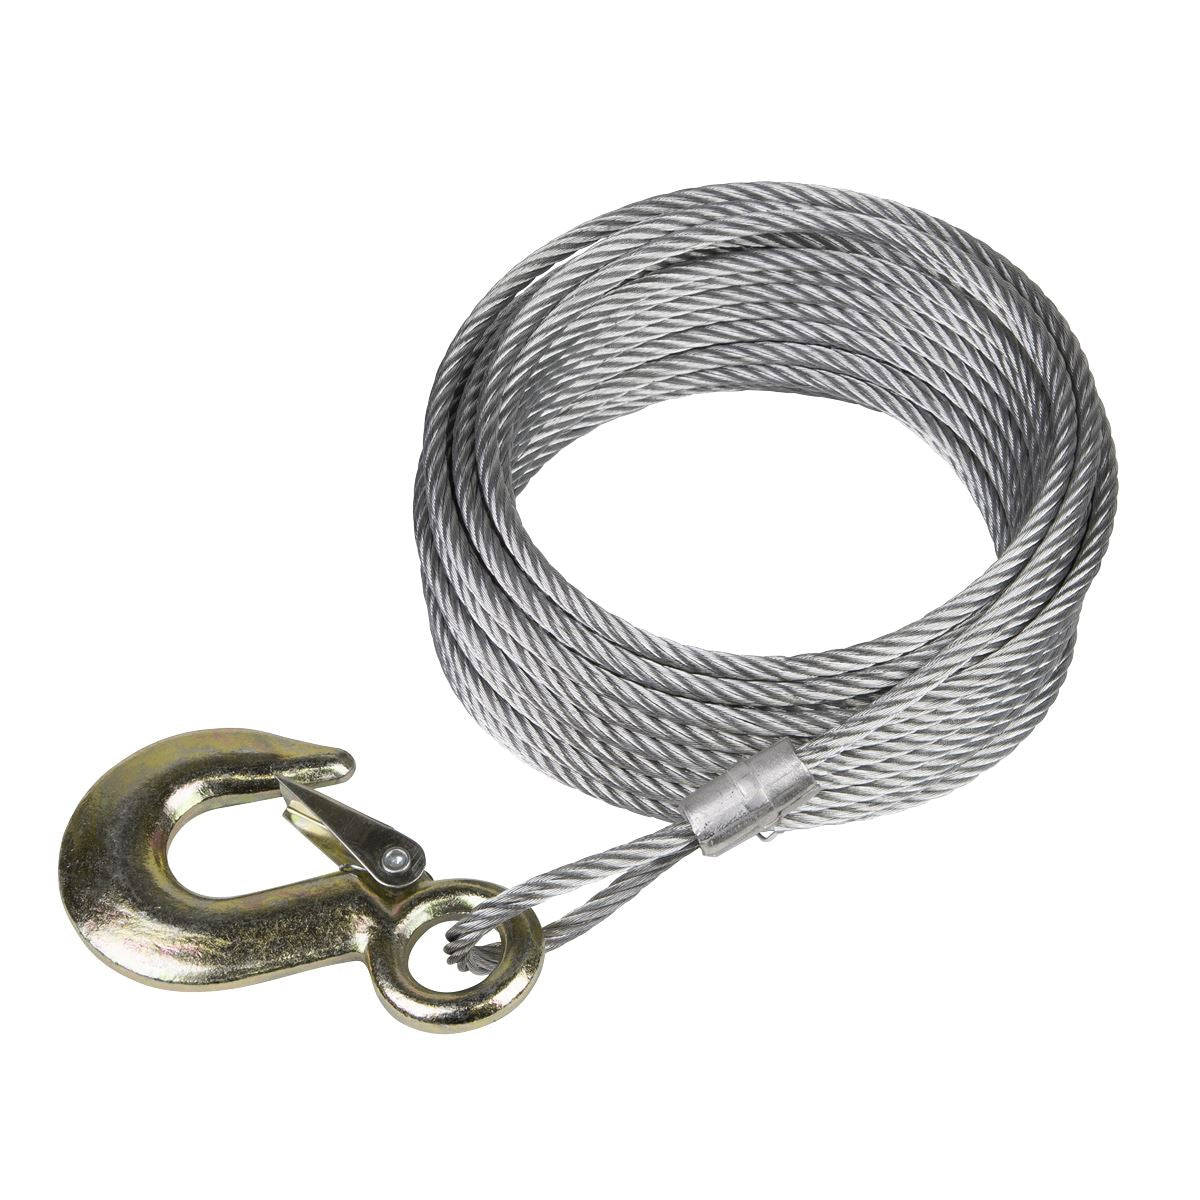 Sealey Winch Cable/Wire Rope Ø5.1mm x 10m 810kg Breaking Strength with Forged Hook